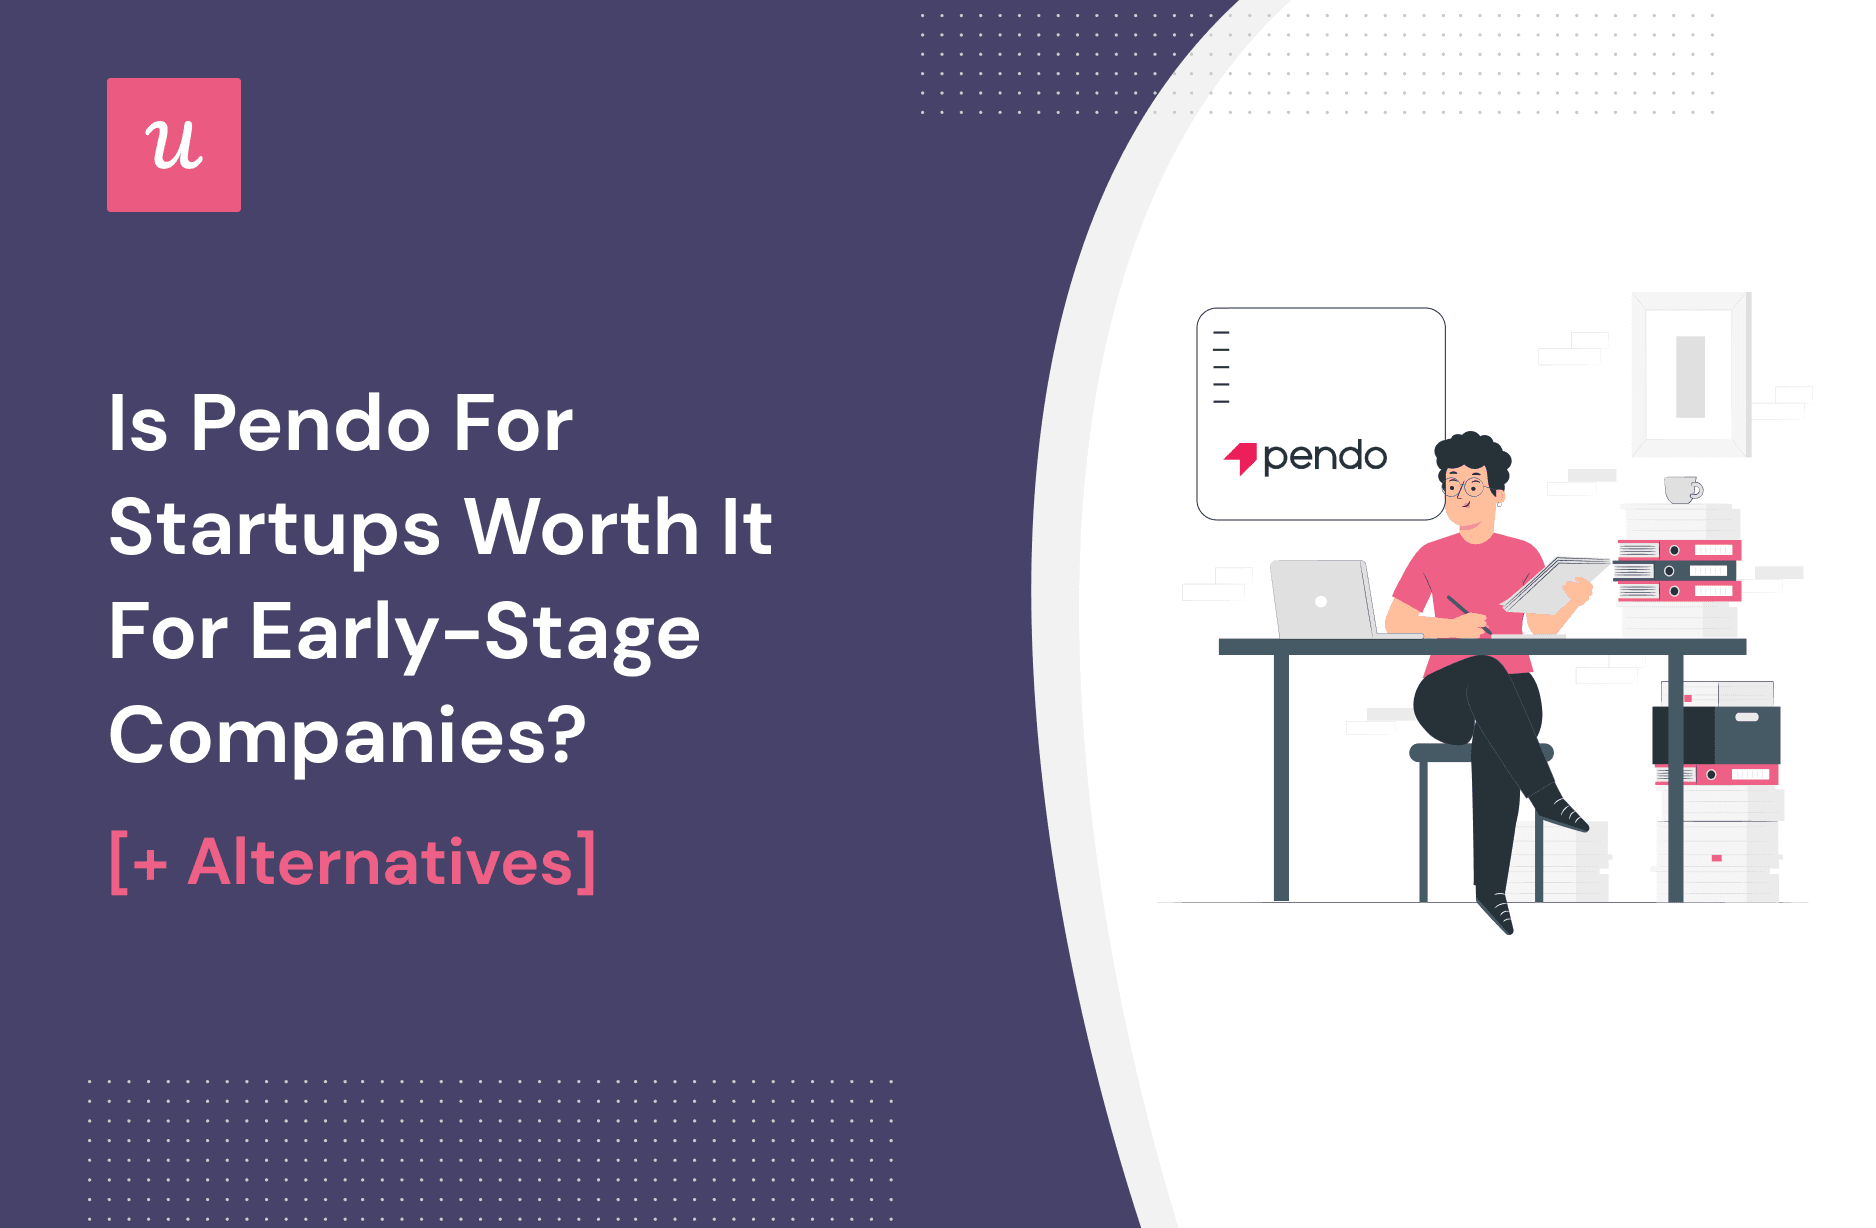 Is Pendo for Startups Worth It for Early-Stage Companies? [+ Alternatives] cover